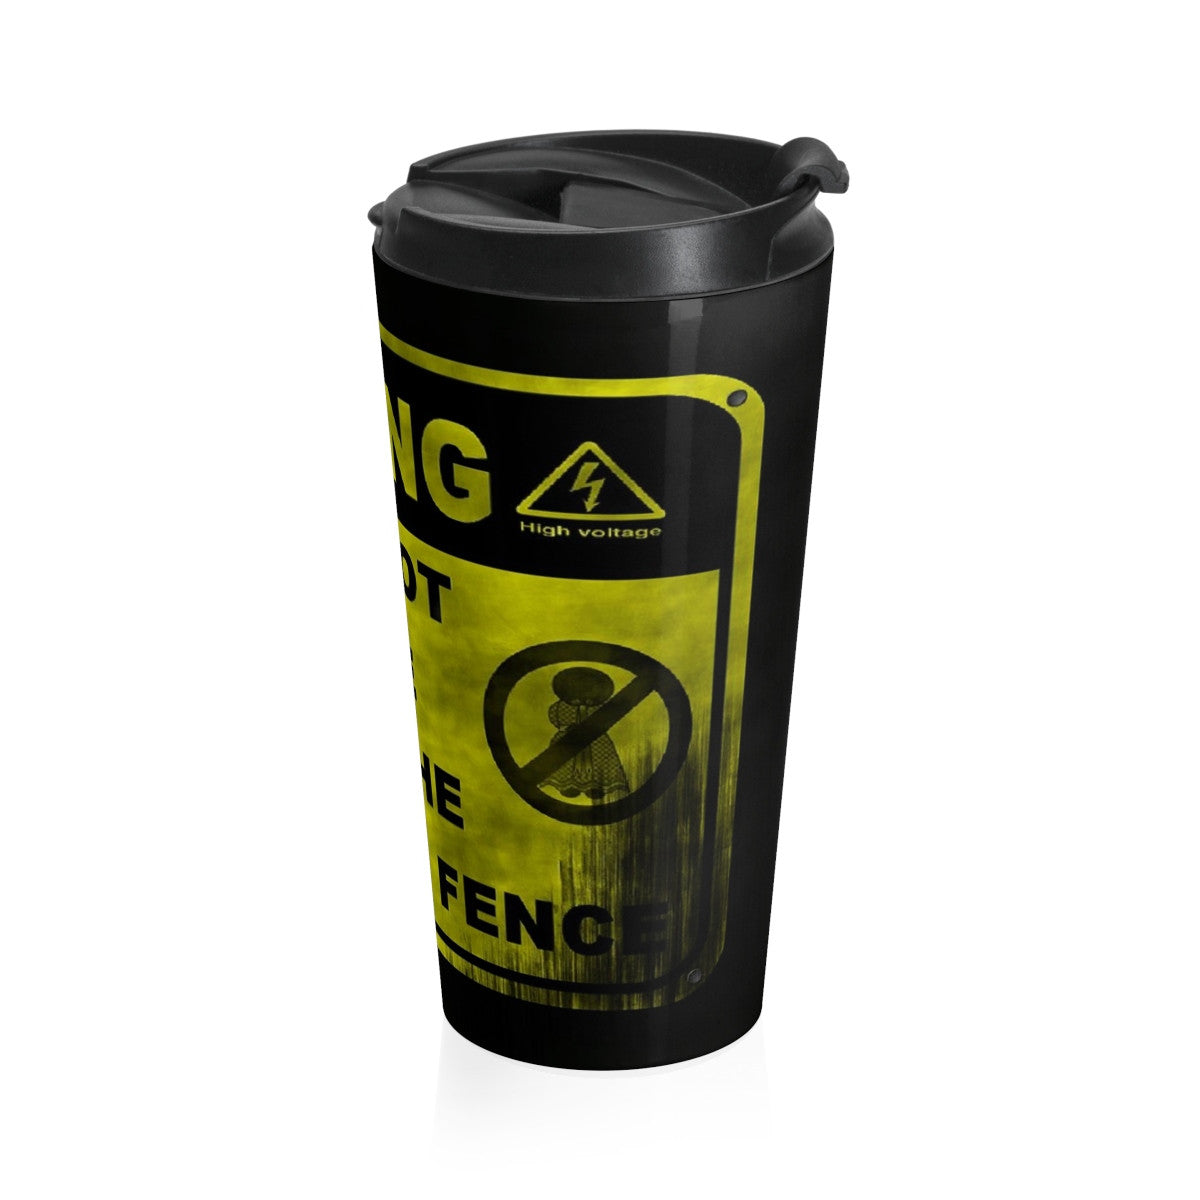 Funny do not pee on fence Stainless Steel Travel Mug